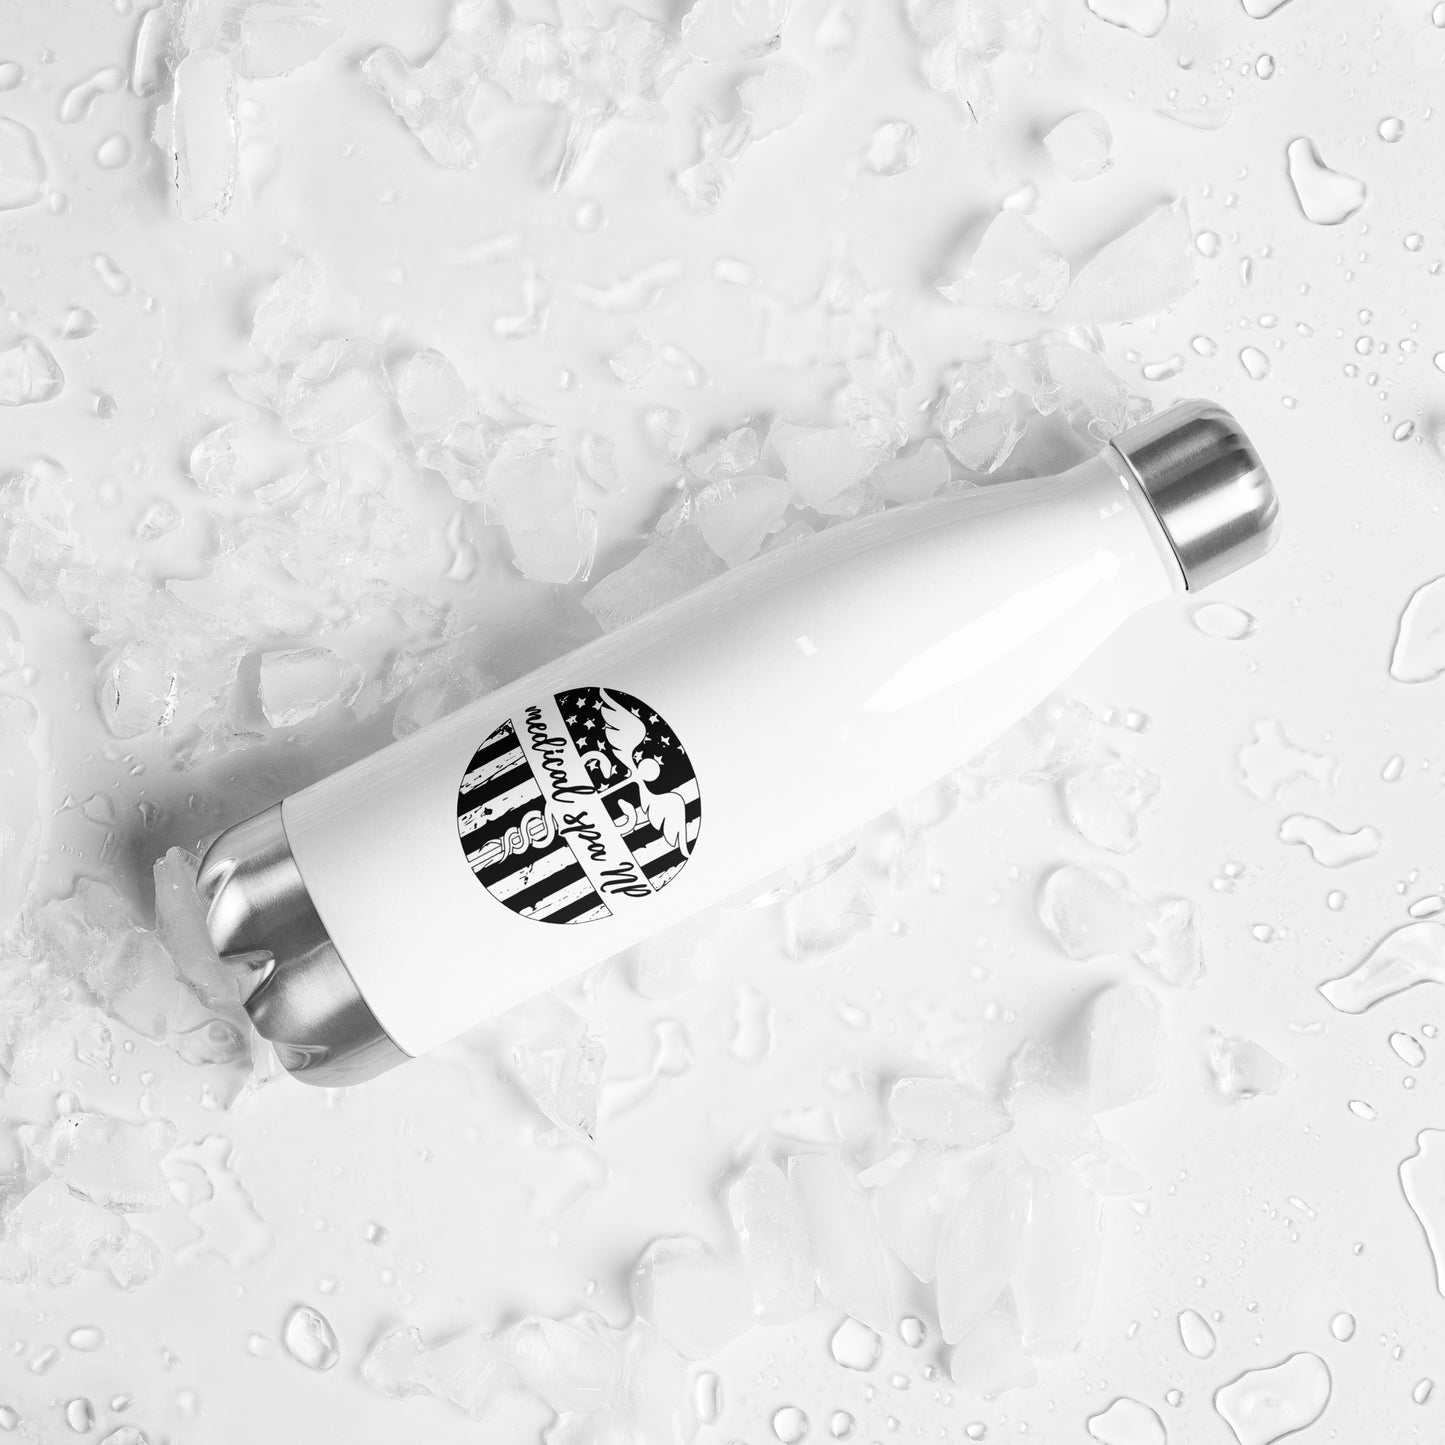 Stainless steel water bottle black or white with flag logo